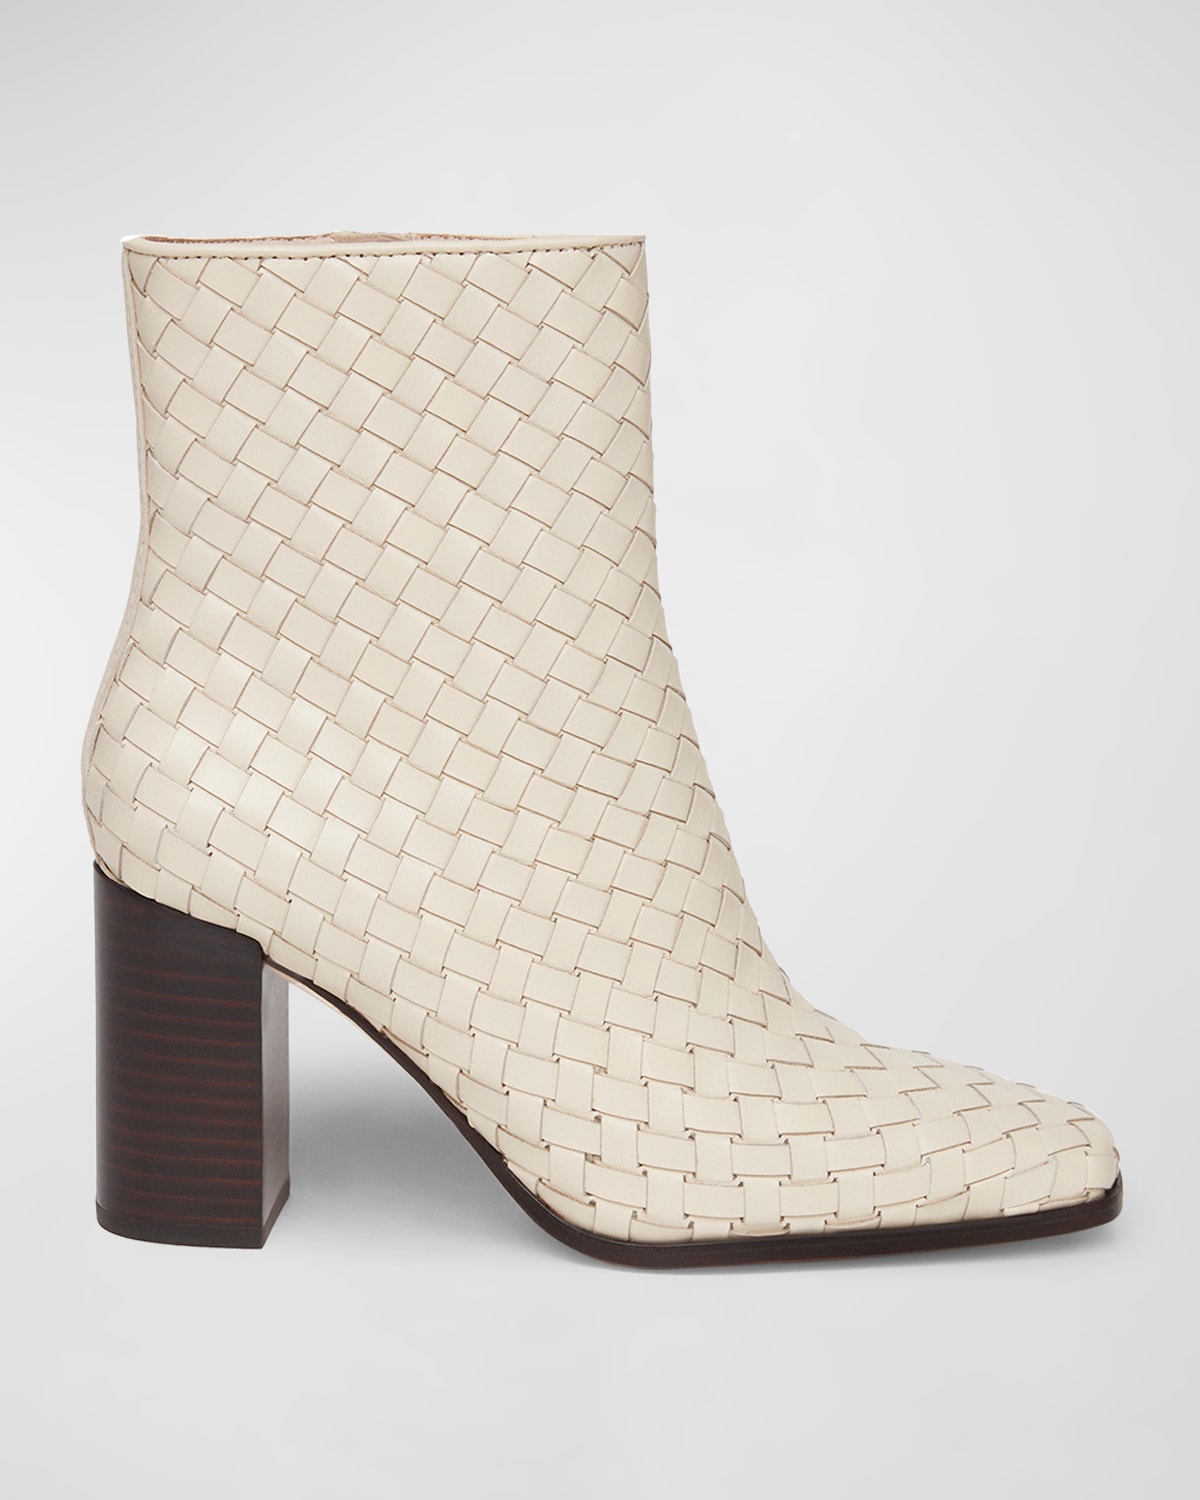 PAIGE FRANCES WOVEN LEATHER ANKLE BOOTIES